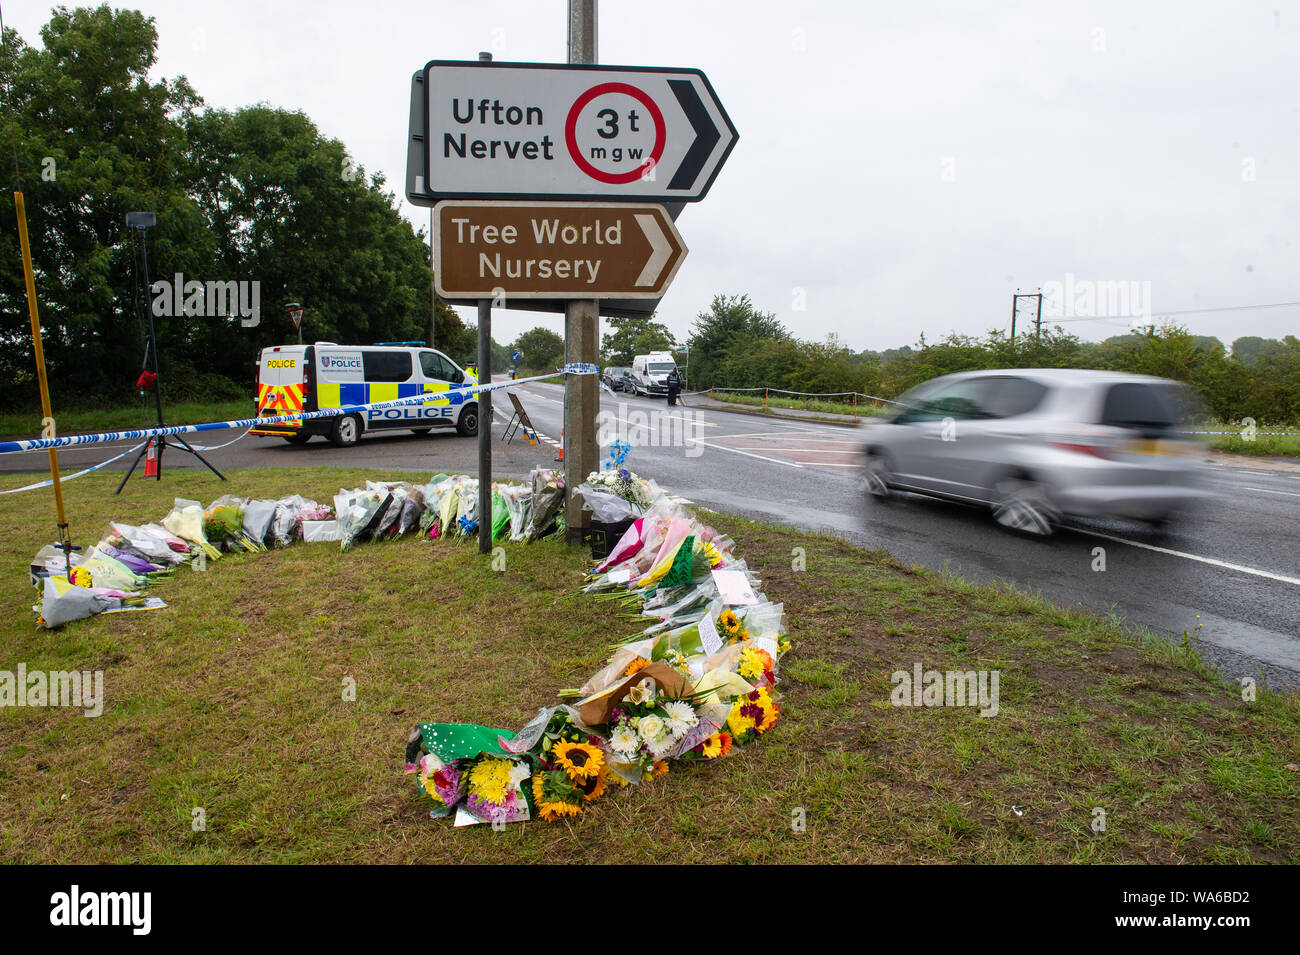 Police and flowers left at the scene where Thames Valley Police officer Pc Andrew Harper, 28, died following a 'serious incident' at about 11.30pm on Thursday near the A4 Bath Road, between Reading and Newbury, at the village of Sulhamstead in Berkshire. Stock Photo